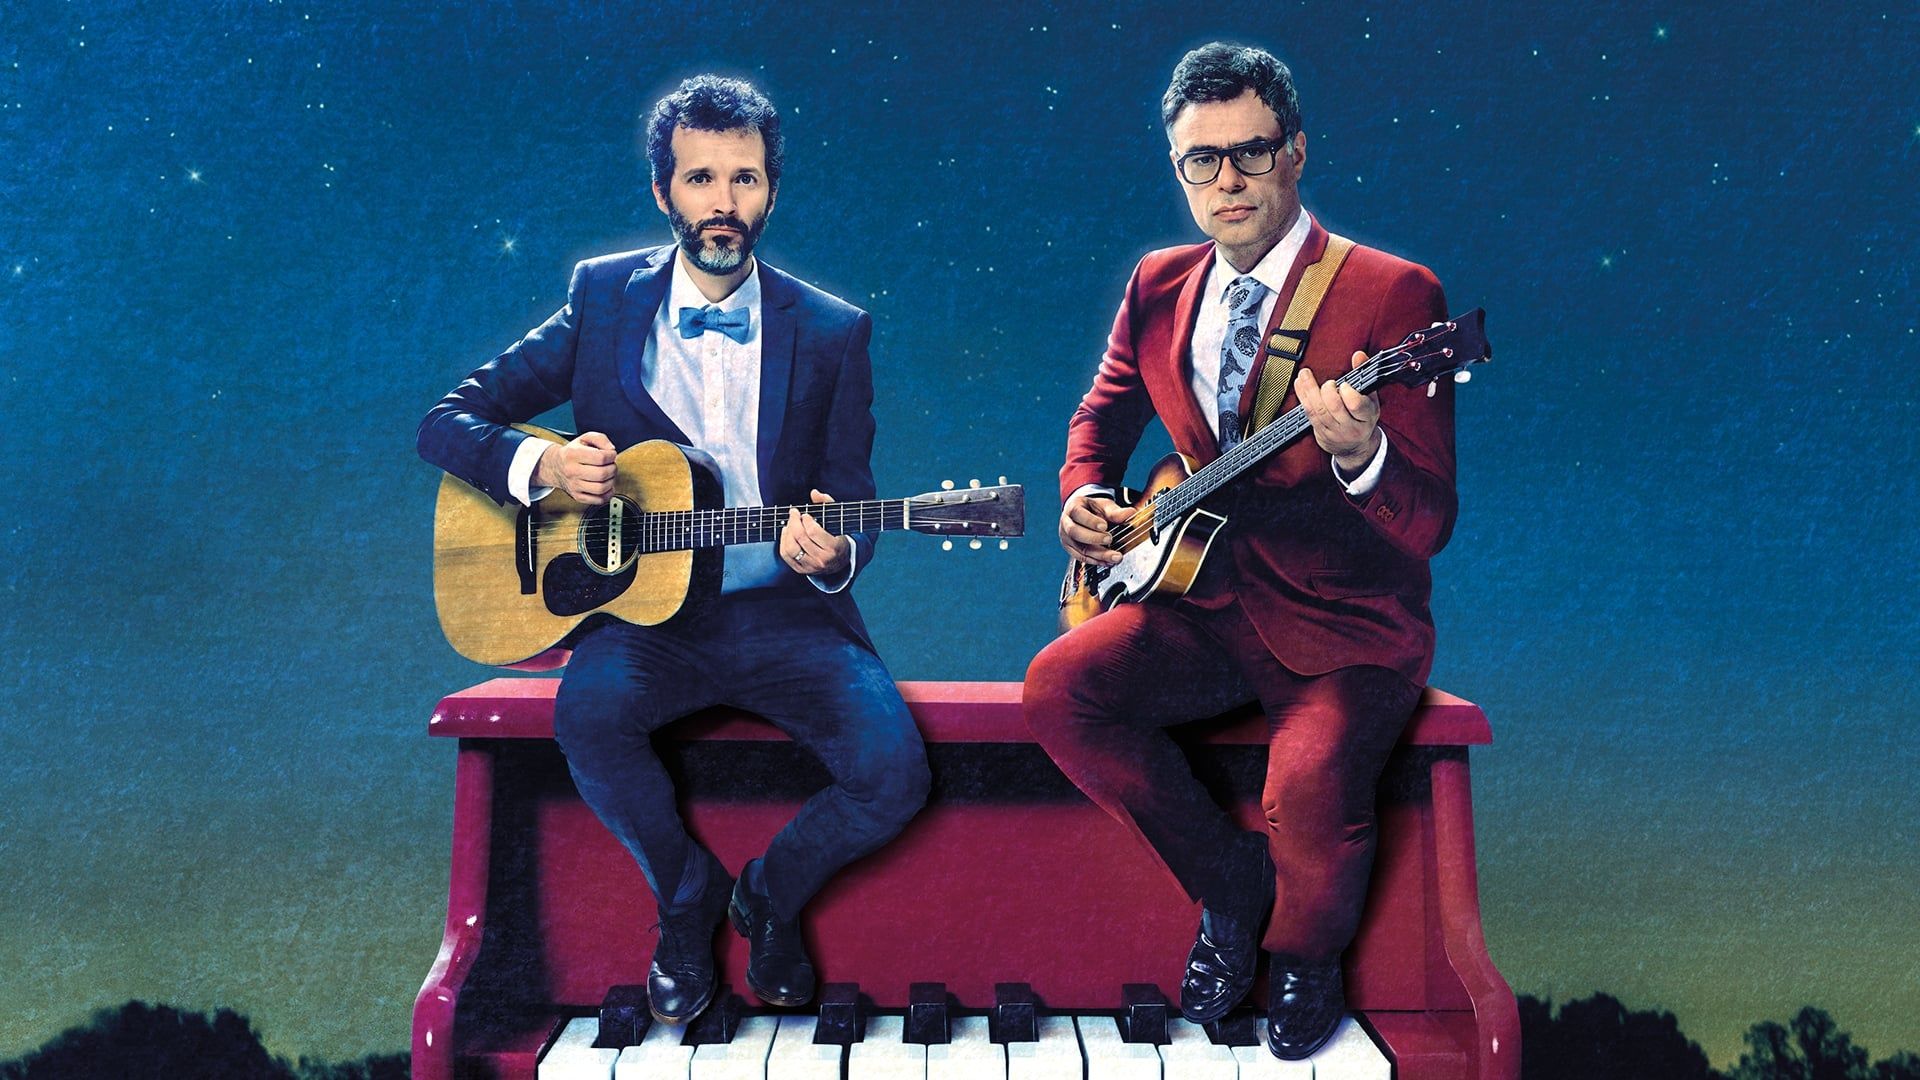 Flight of the Conchords: Live in London background